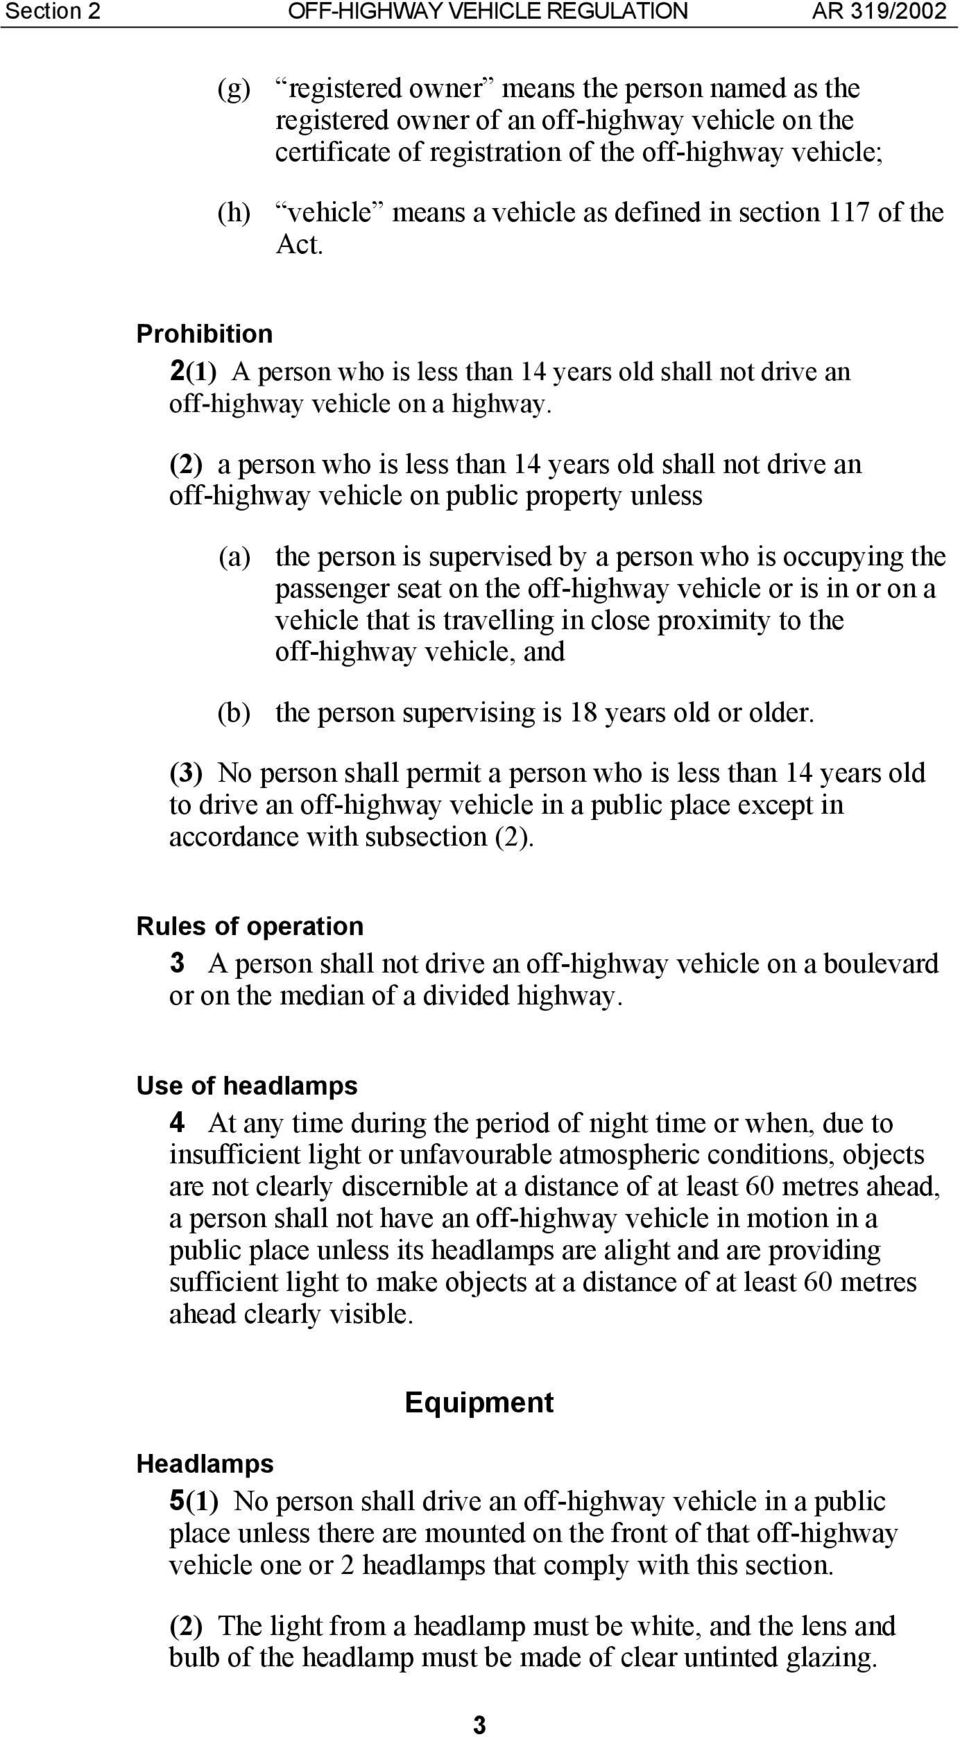 (2) a person who is less than 14 years old shall not drive an off-highway vehicle on public property unless (a) the person is supervised by a person who is occupying the passenger seat on the